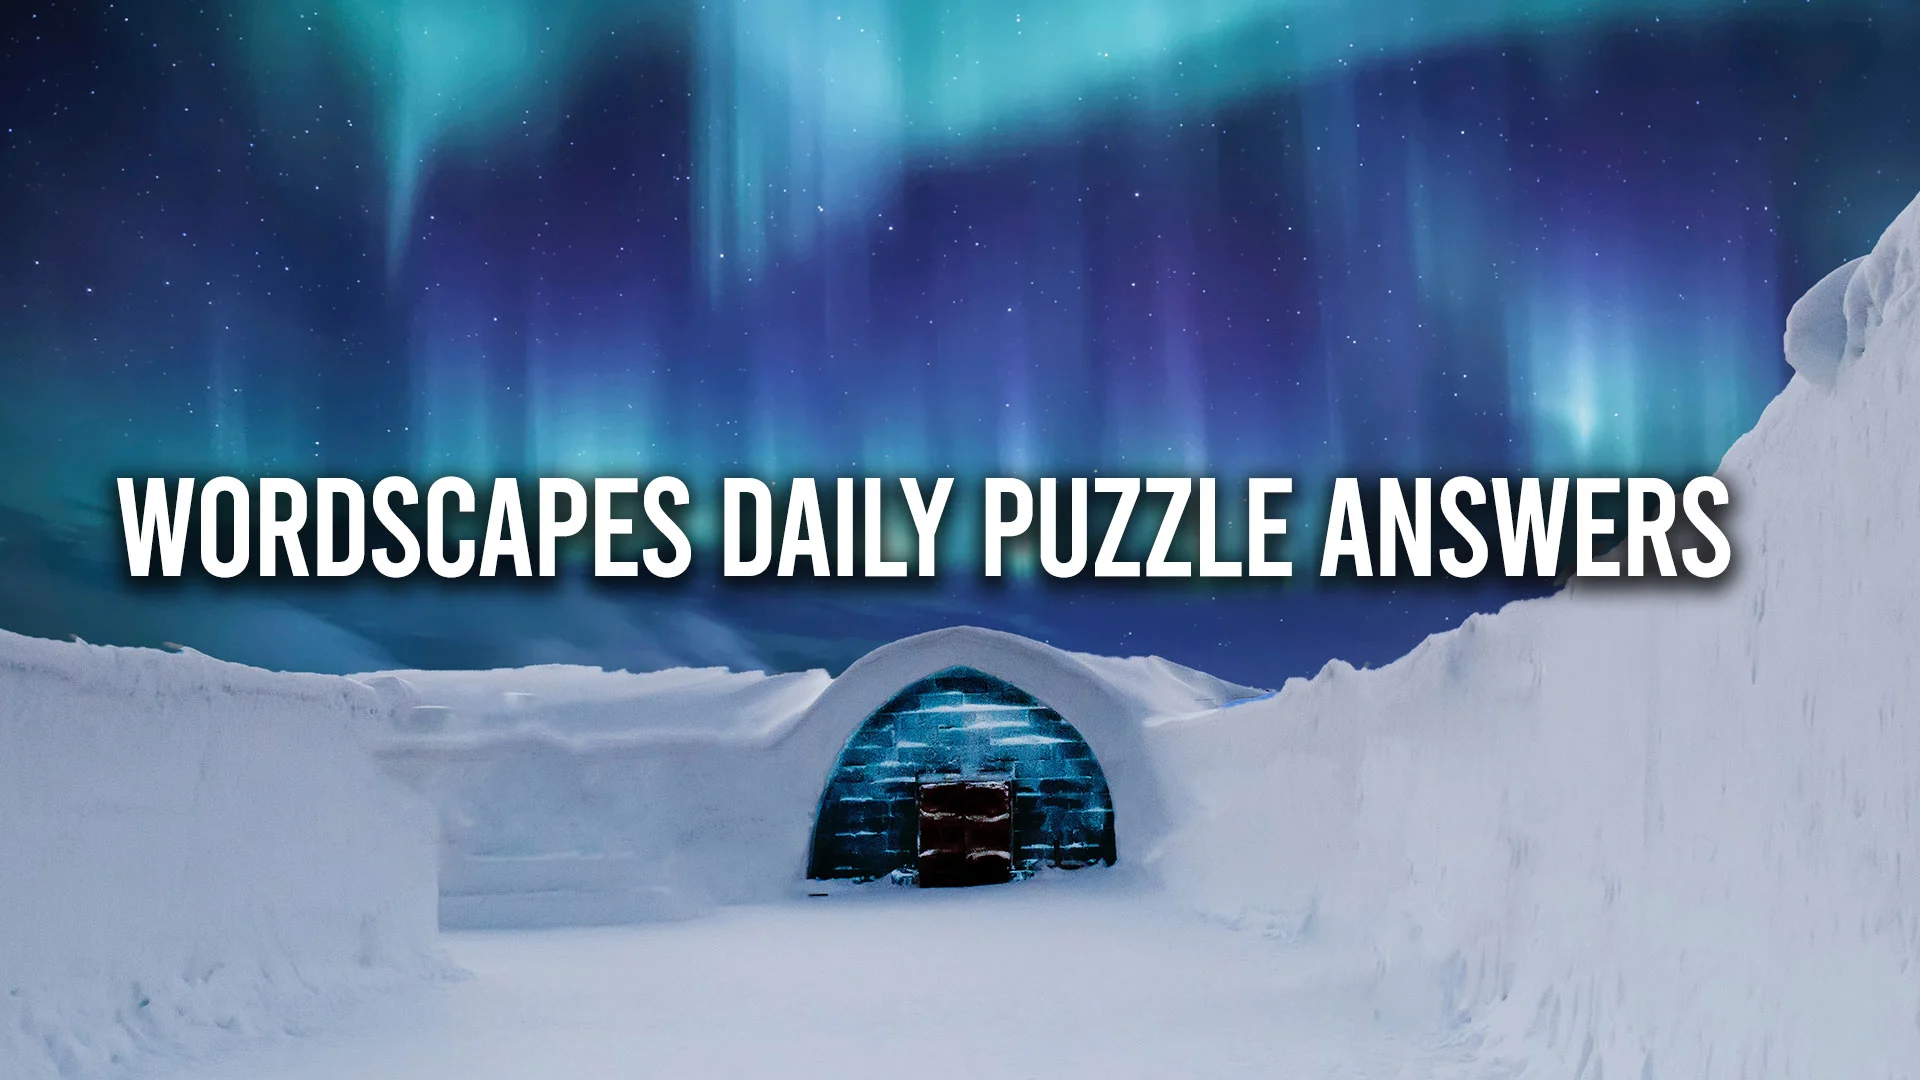 Wordscapes Daily Puzzle Answers for February 5 2023